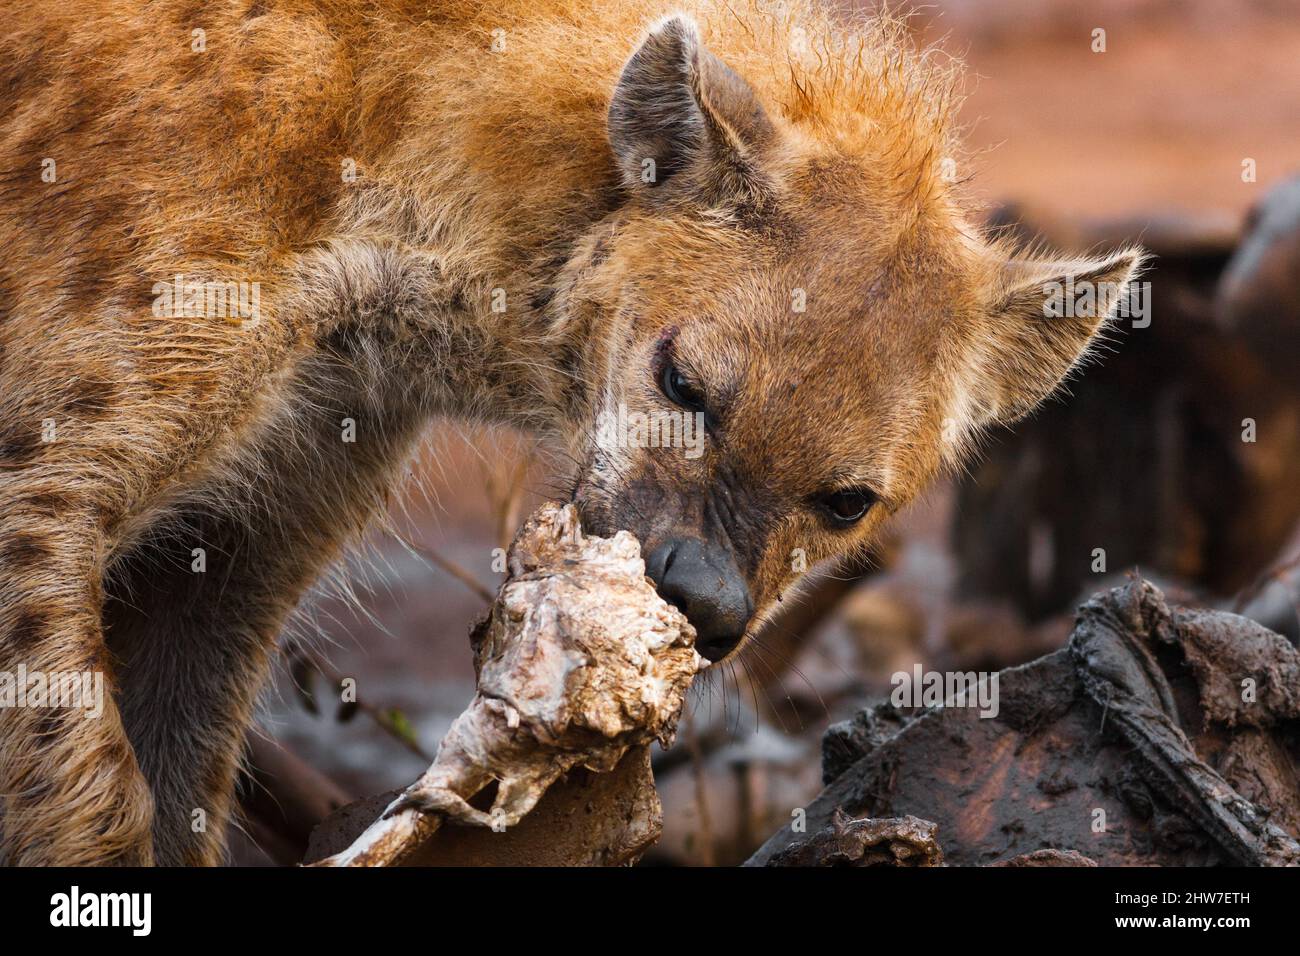 Portrait of Spotted Hyaena, Crocuta crocuta, feeding on old carcass of African Elephant, Loxodonta africana, North-West Province, South Africa Stock Photo